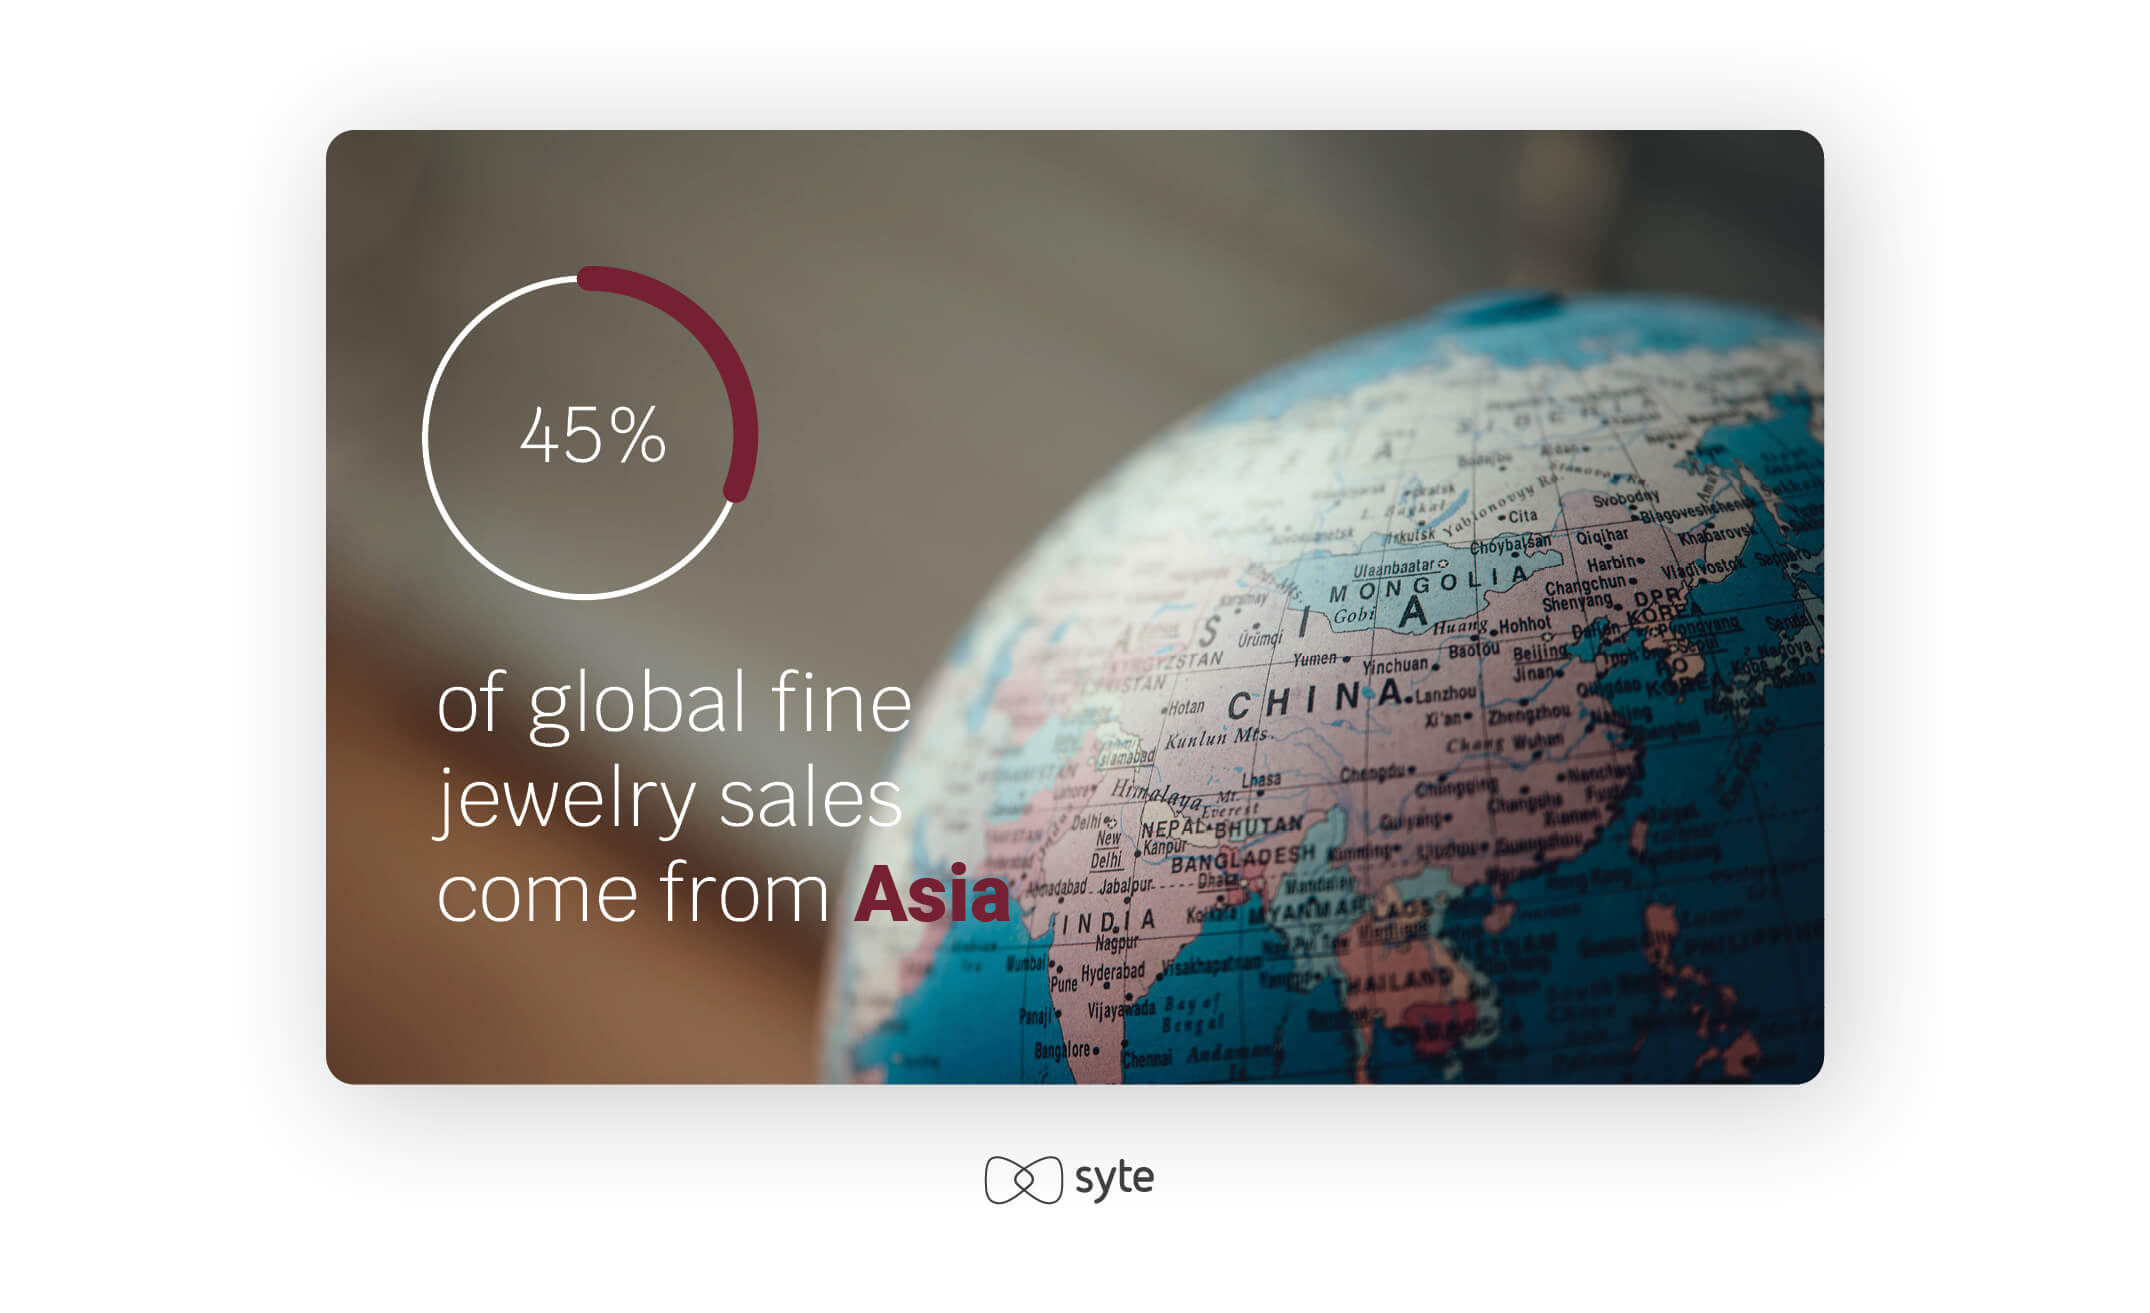 45% of global fine jewelry sales come from Asia